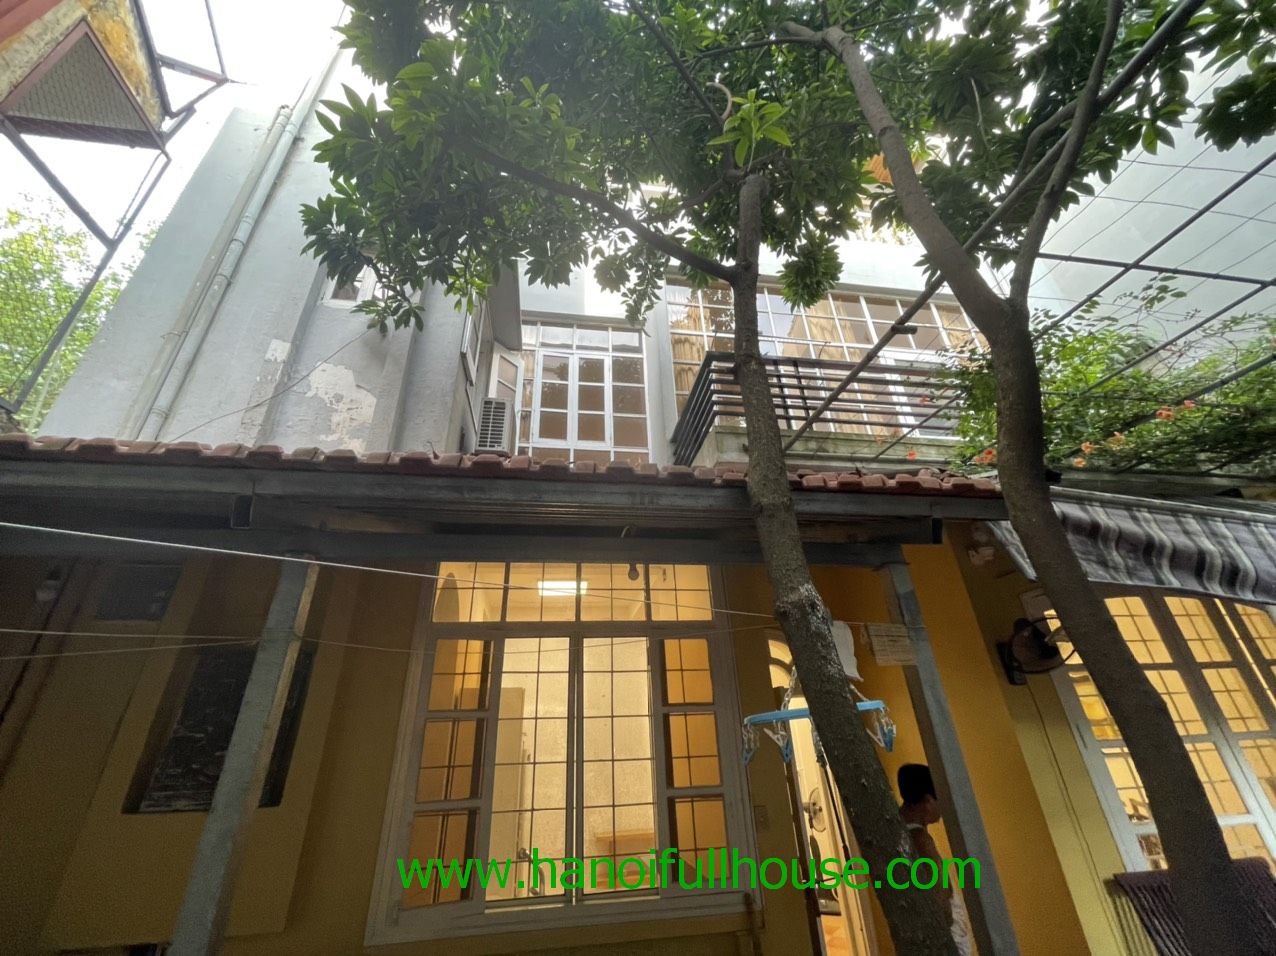 4 Bedroom house with yard garden in Tay Ho dist to rent